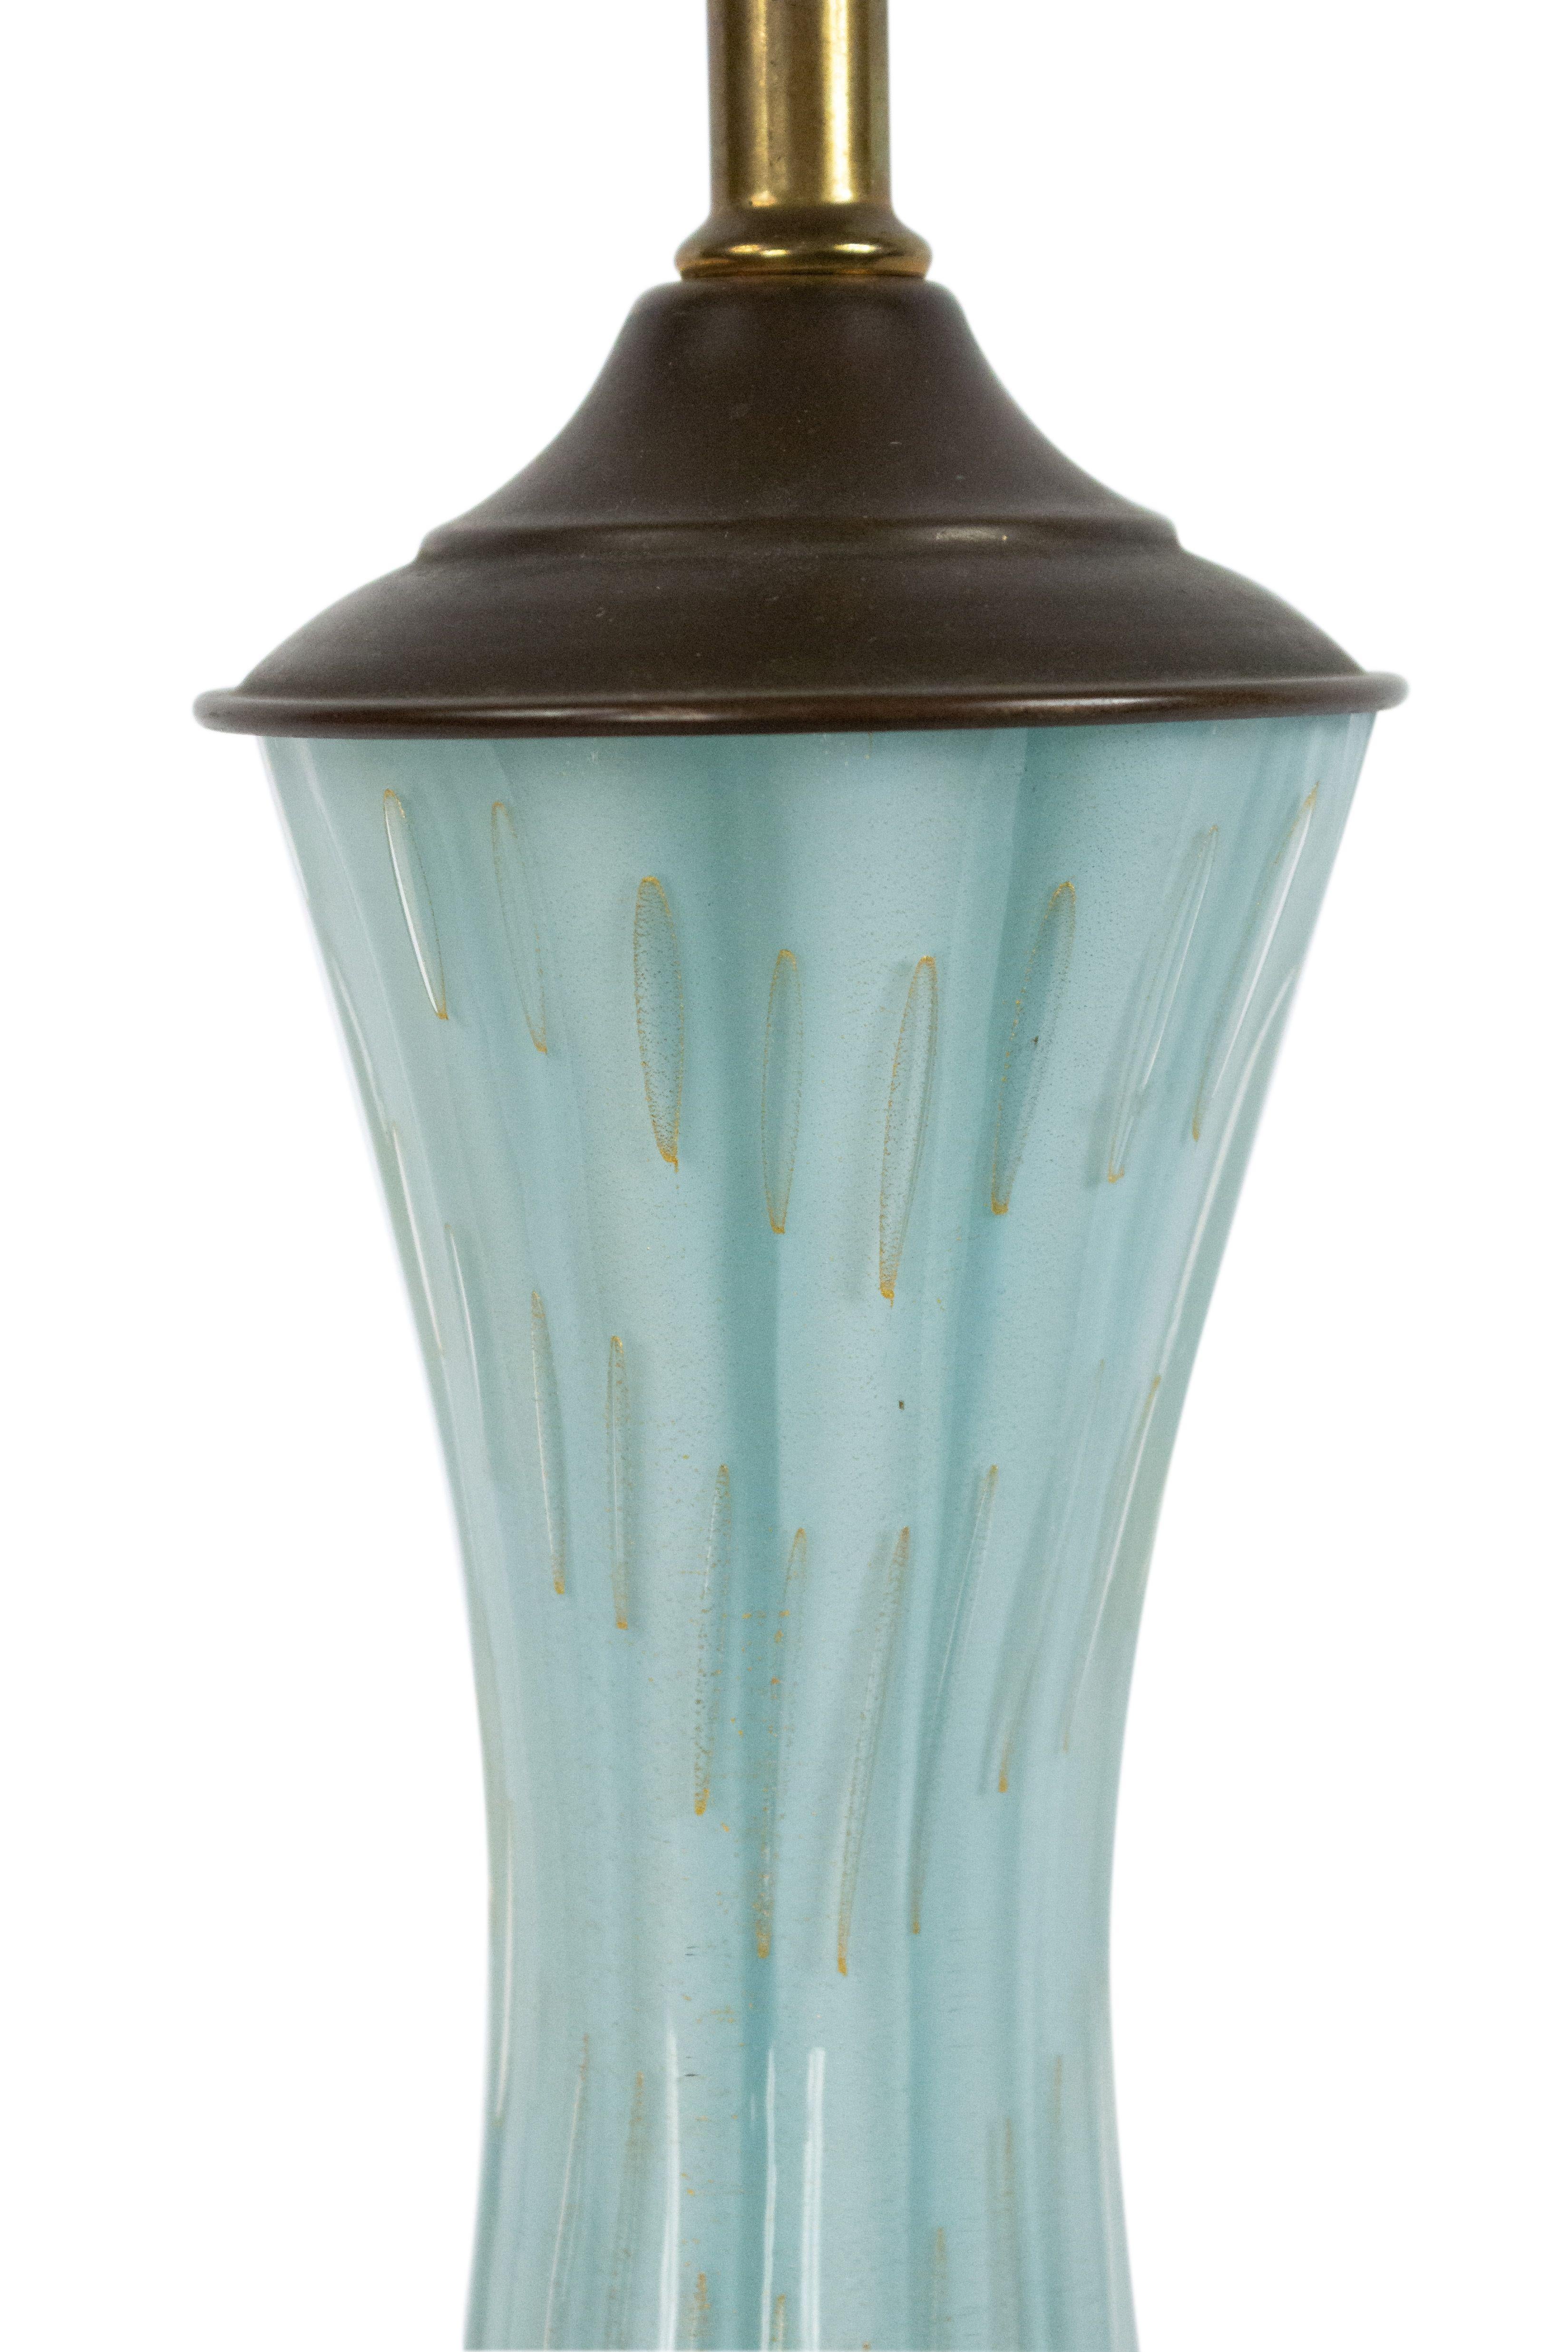 Italian (mid-20th century) blue glass fluted and shaped table lamp with a gold bubble decoration.